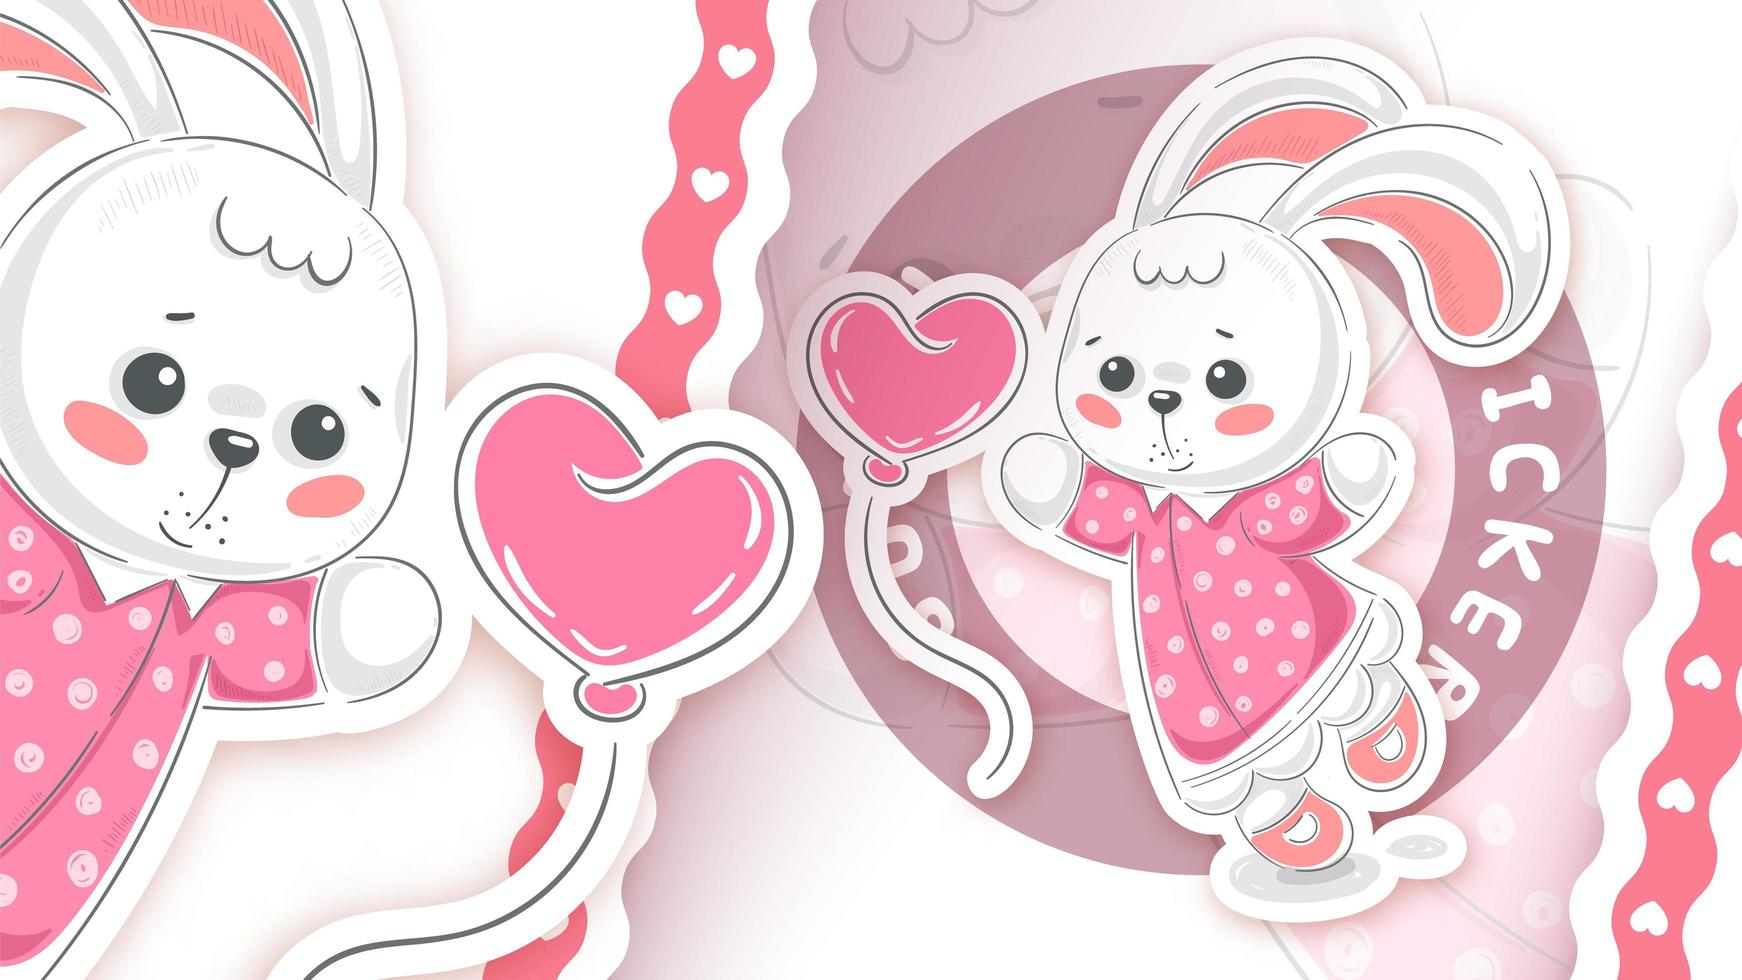 Rabbit with balloon in sticker style vector